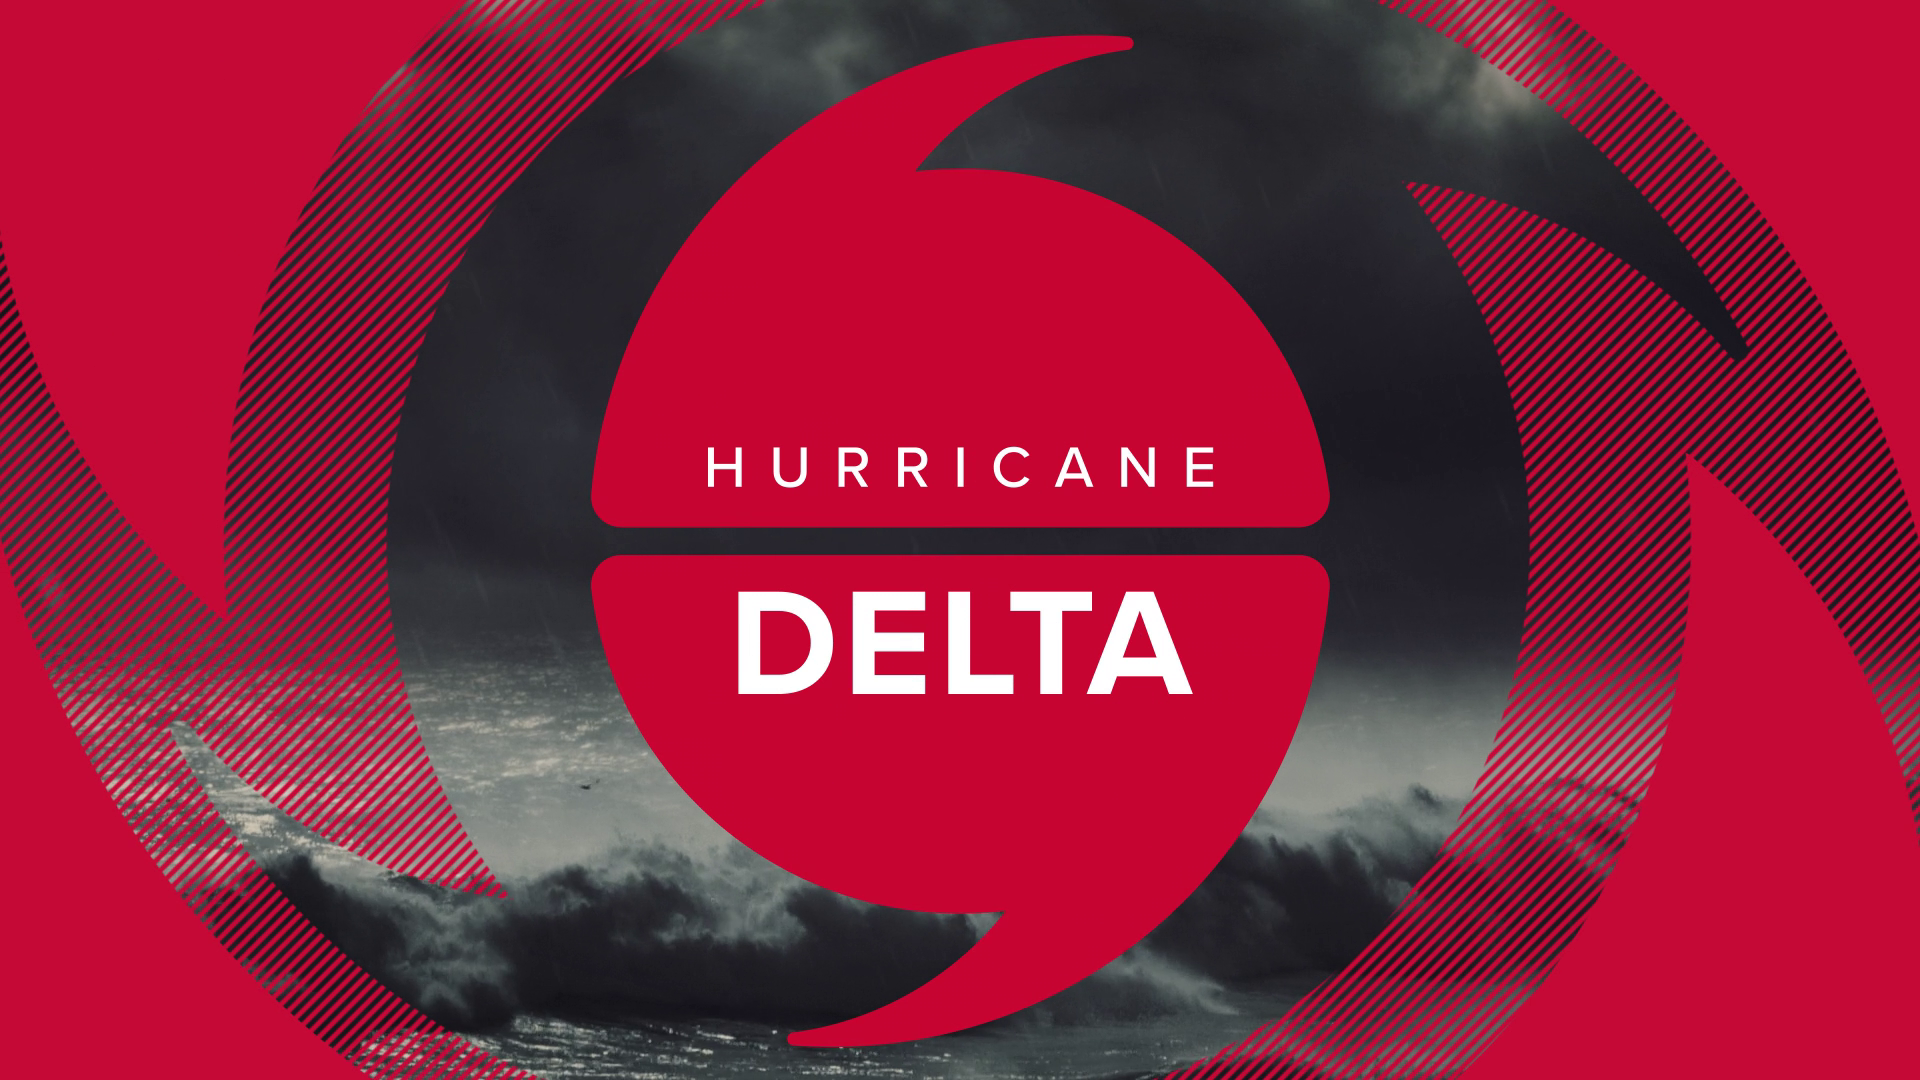 Central Texas will soon head to Louisiana to help with Hurricane Delta and recovery efforts there.